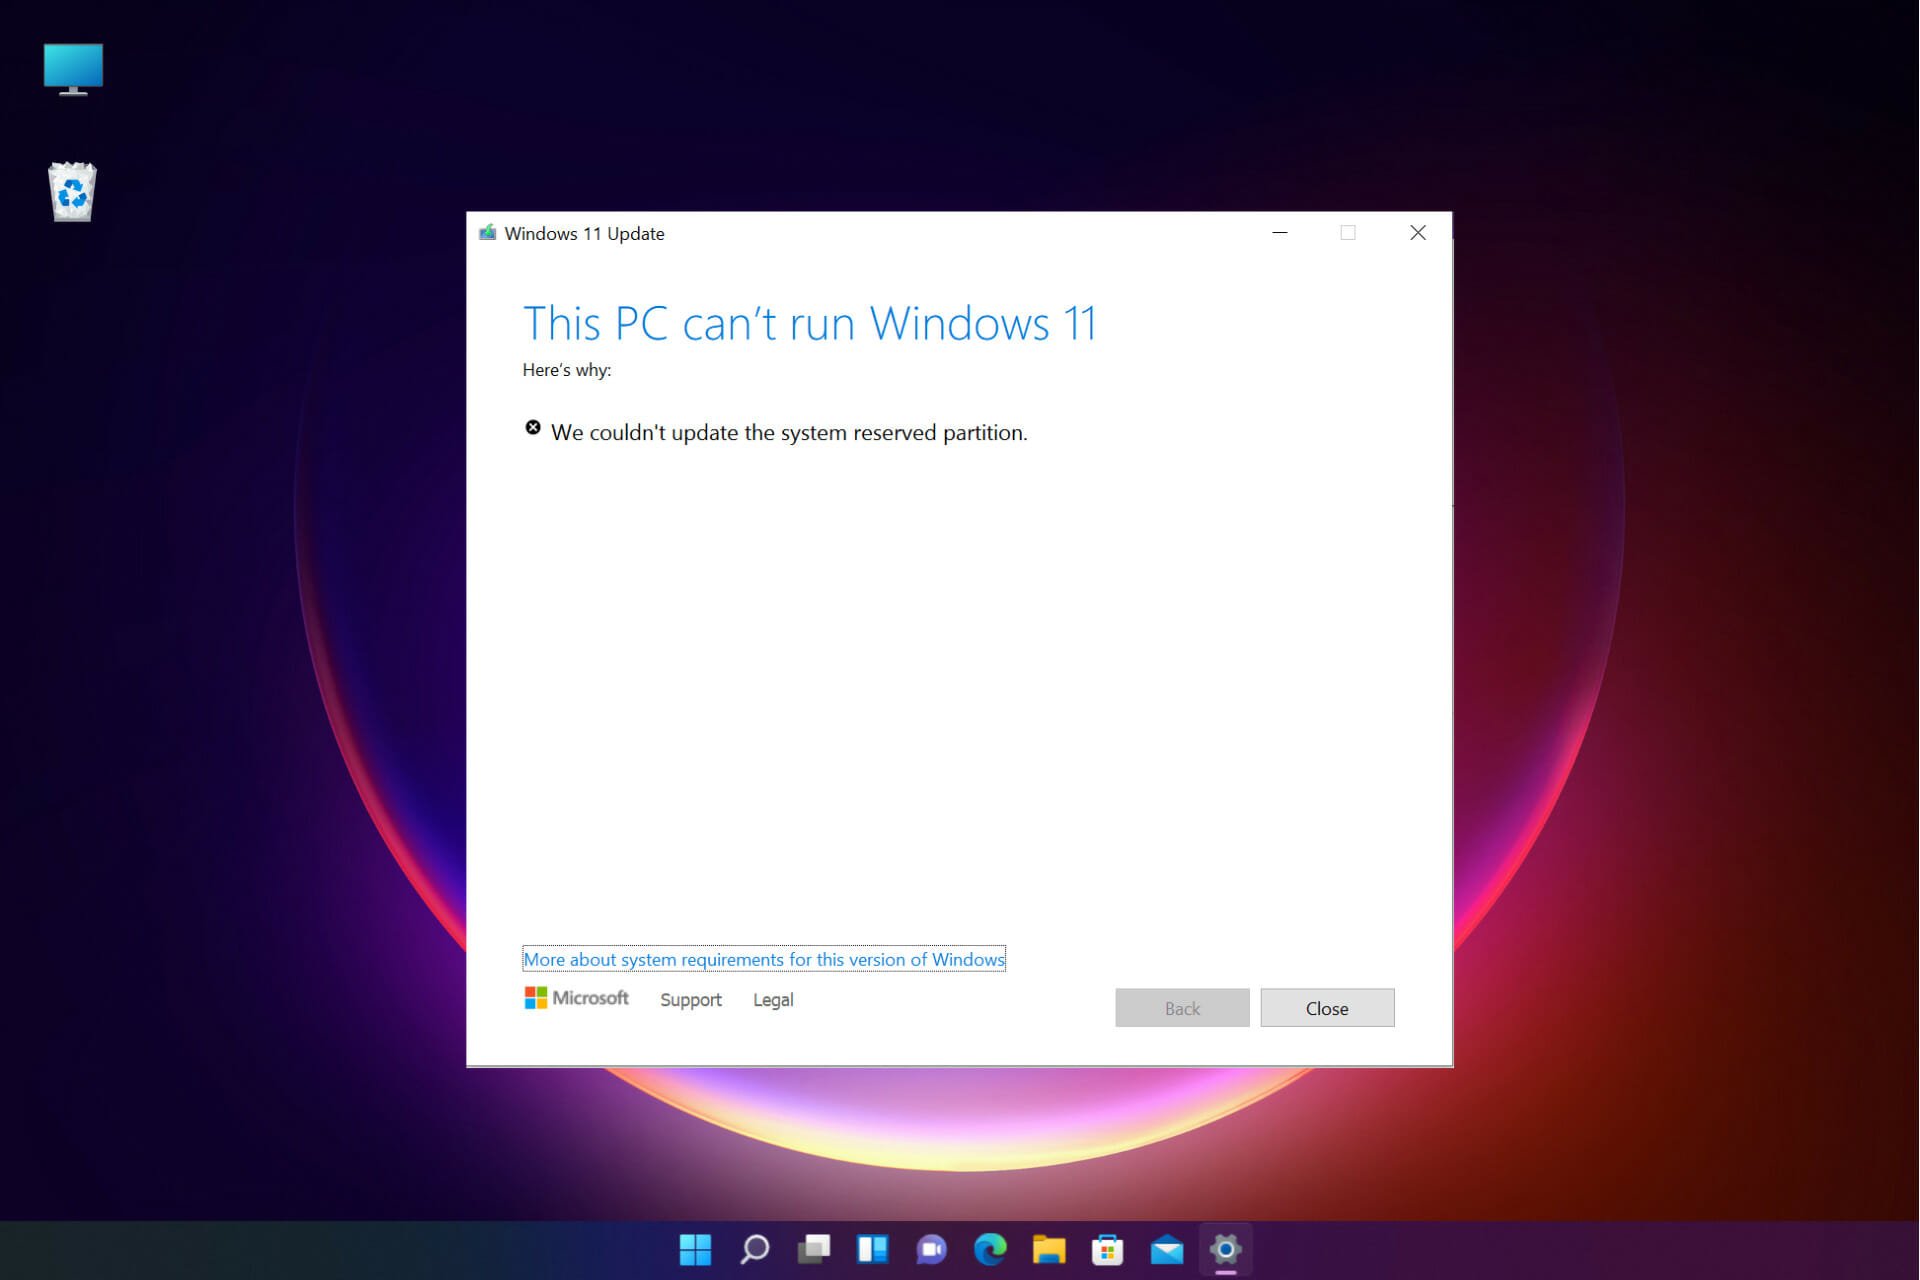 Hot to fix error We could not update System Reserved Partition on Windows 11